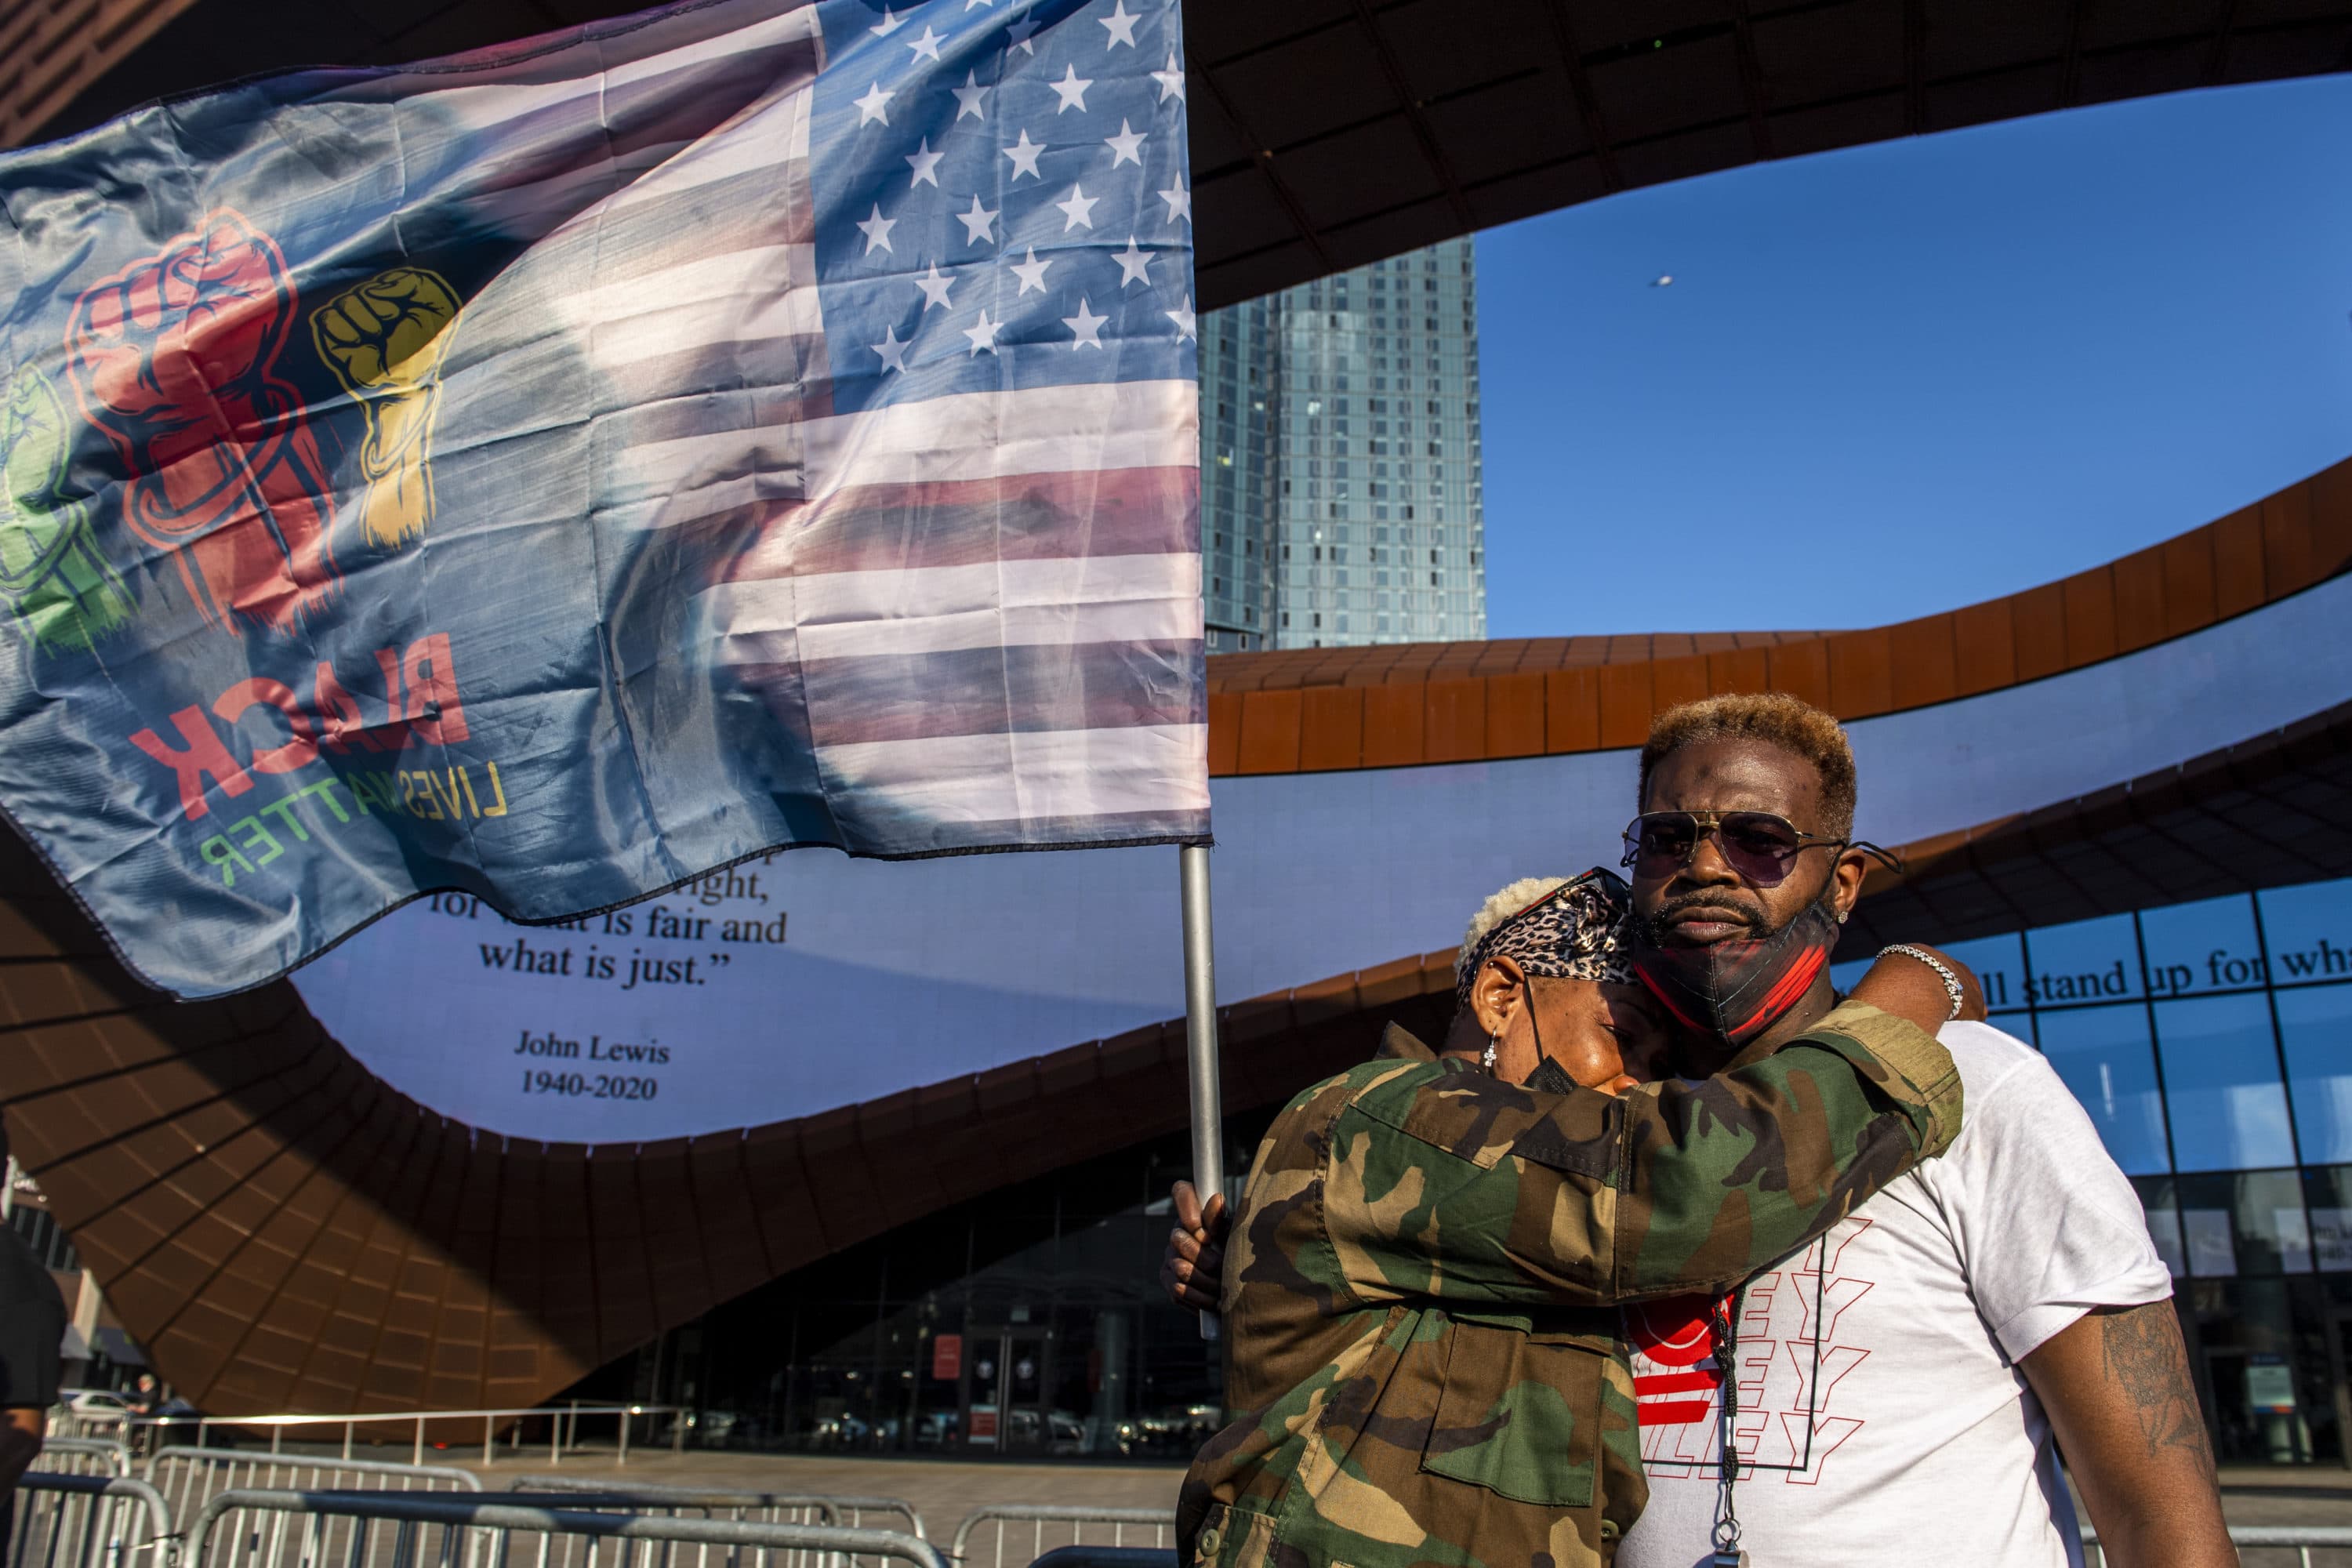 Ingrid Noel, 51, left, weeps on the shoulder of Robert Bolden, at a rally outside the Barclays Center on Tuesday in the Brooklyn borough of New York. (Brittainy Newman/AP)